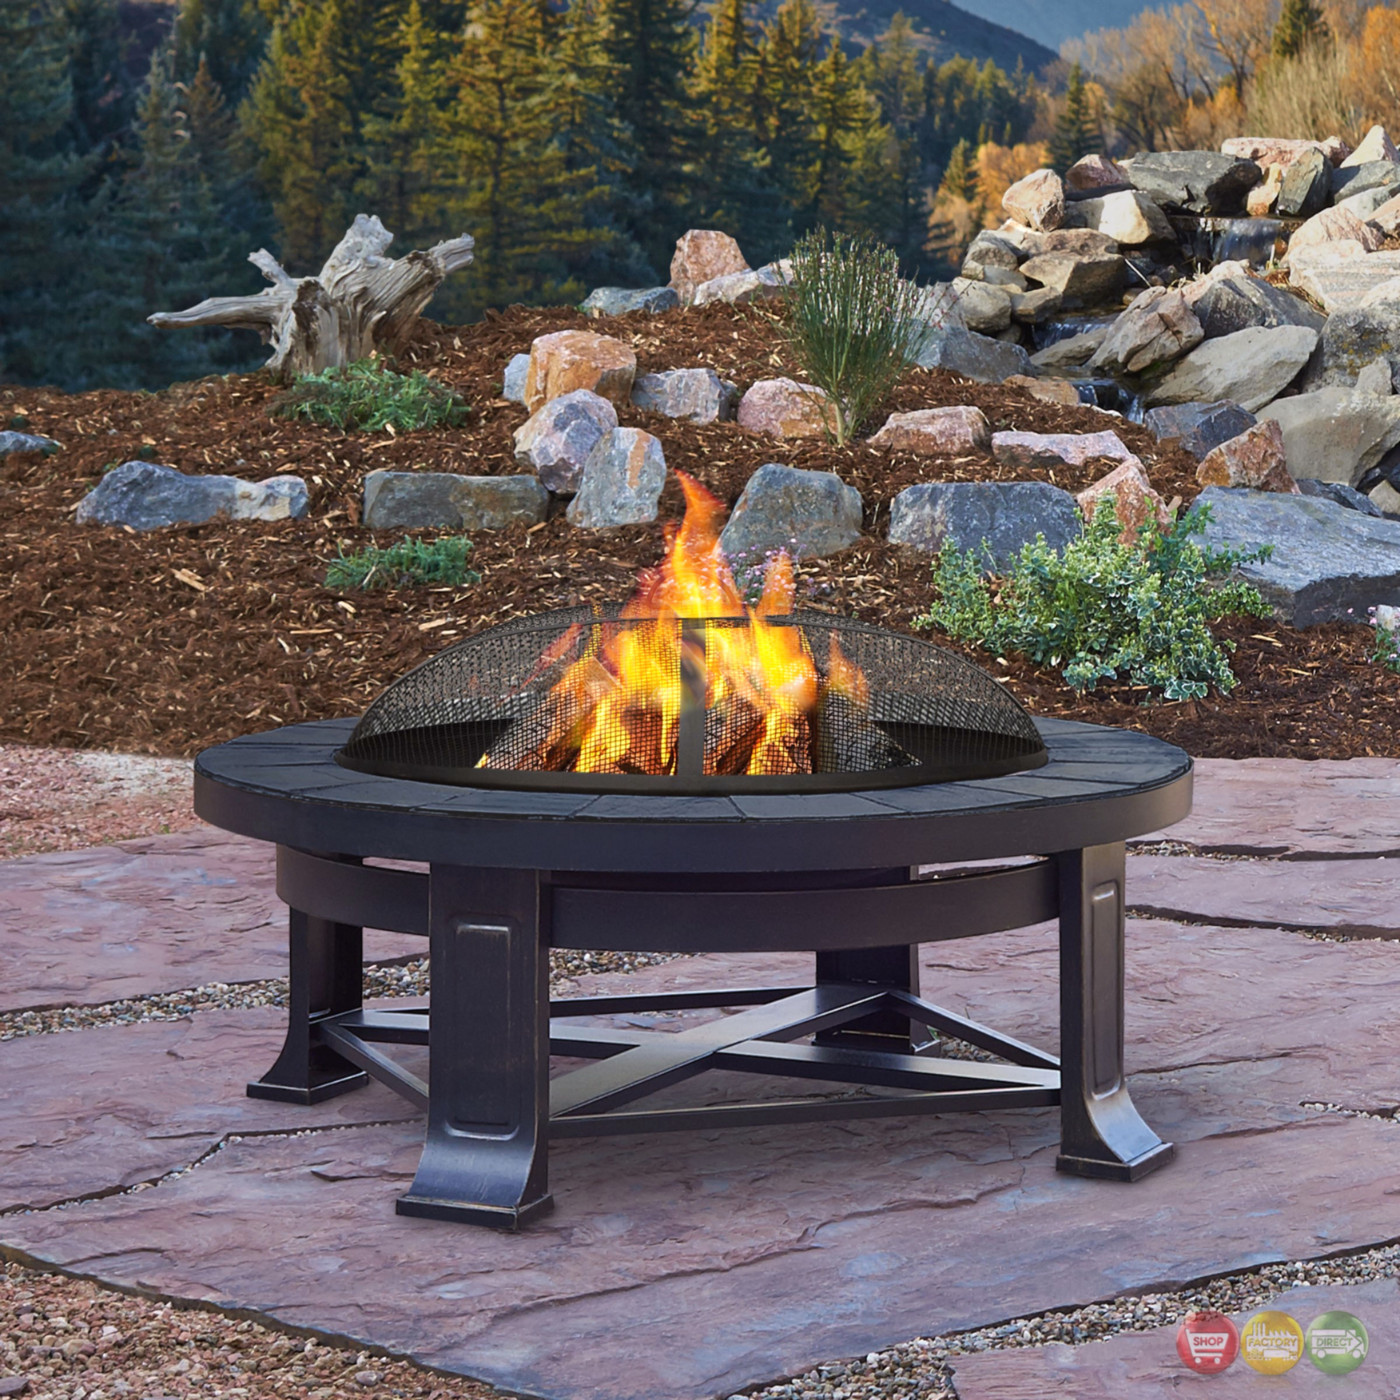 Outdoor Fireplace Or Fire Pit
 Edwards Outdoor Wood burning 34" Round Fire Pit With Gray Tile